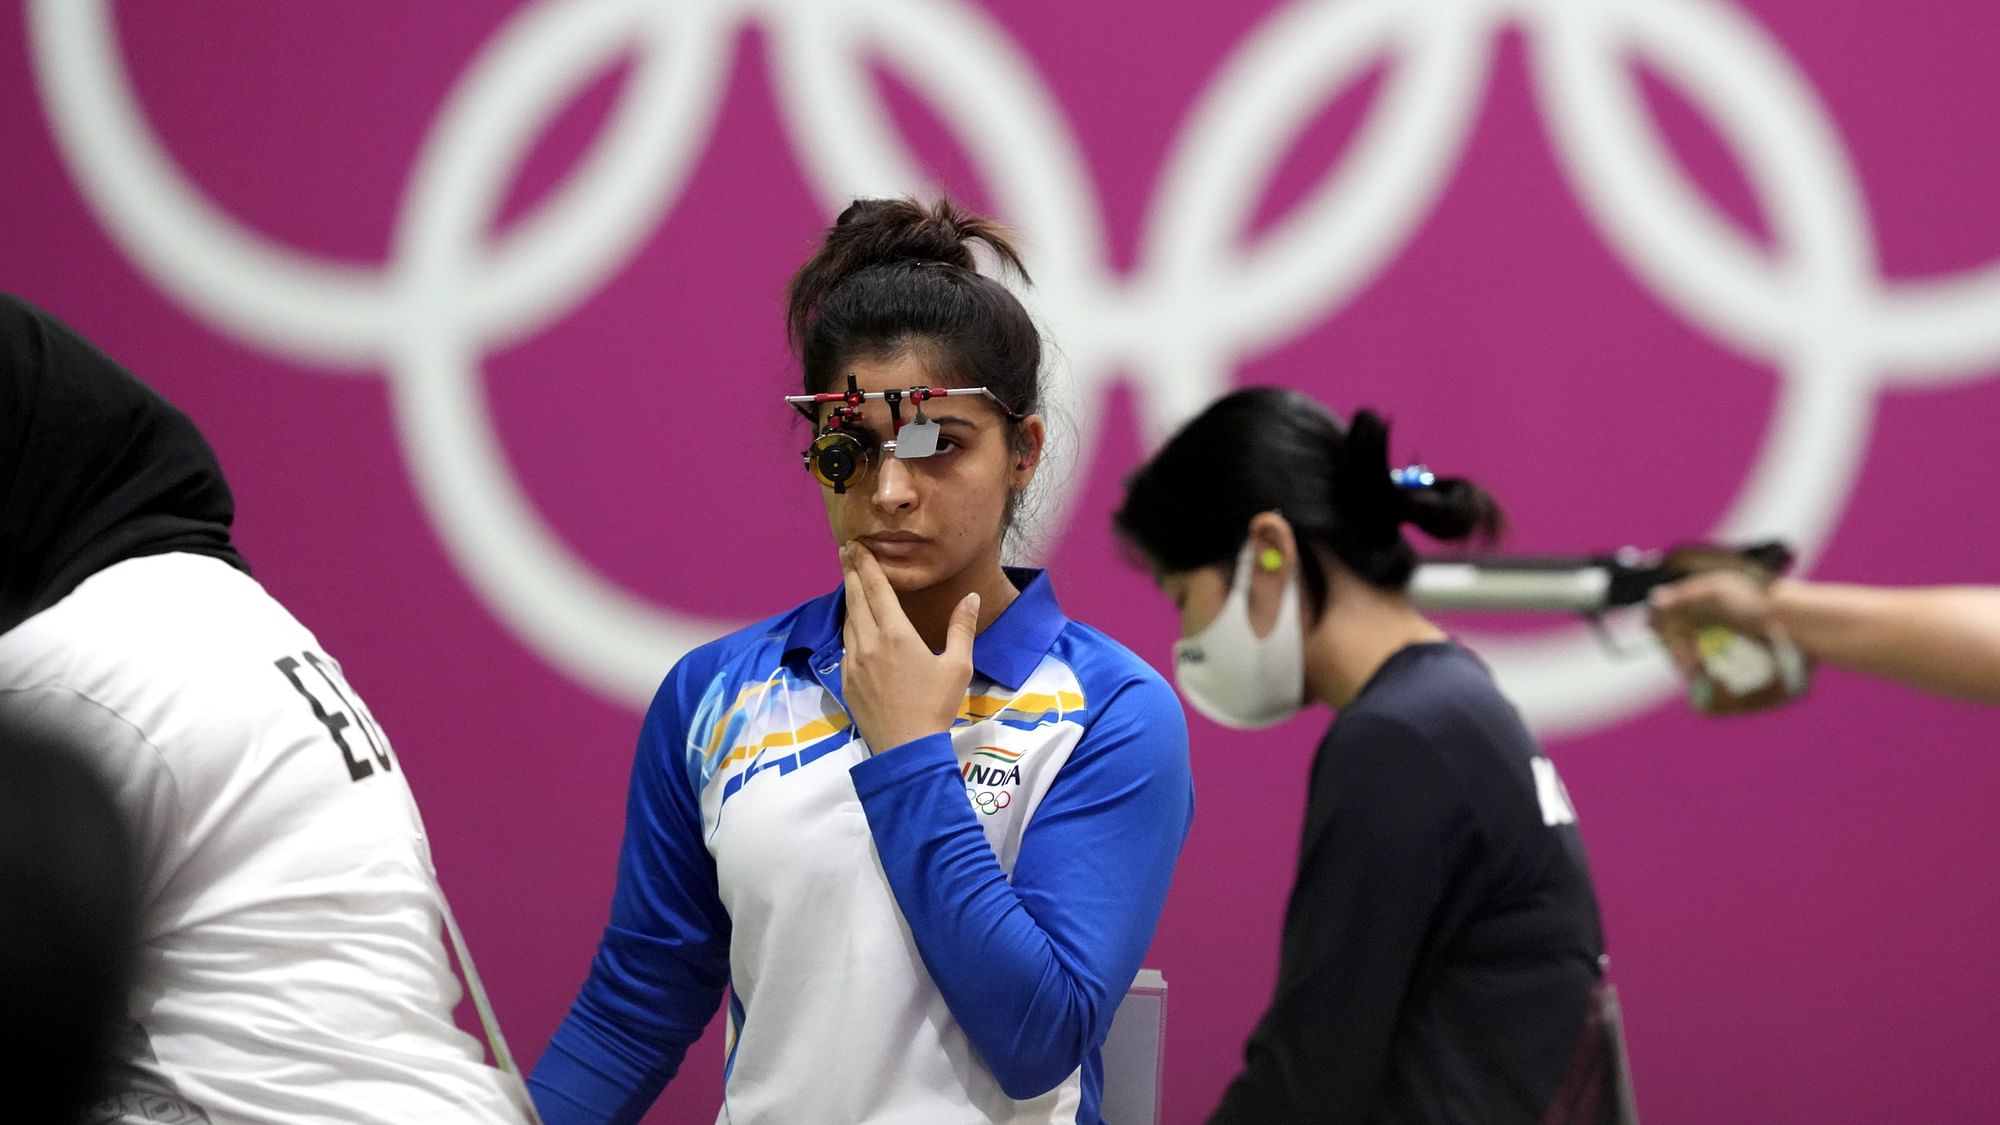 <div class="paragraphs"><p>Manu Bhaker has finished fifth after the first round of qualification in the 25m air pistol event.&nbsp;</p></div>